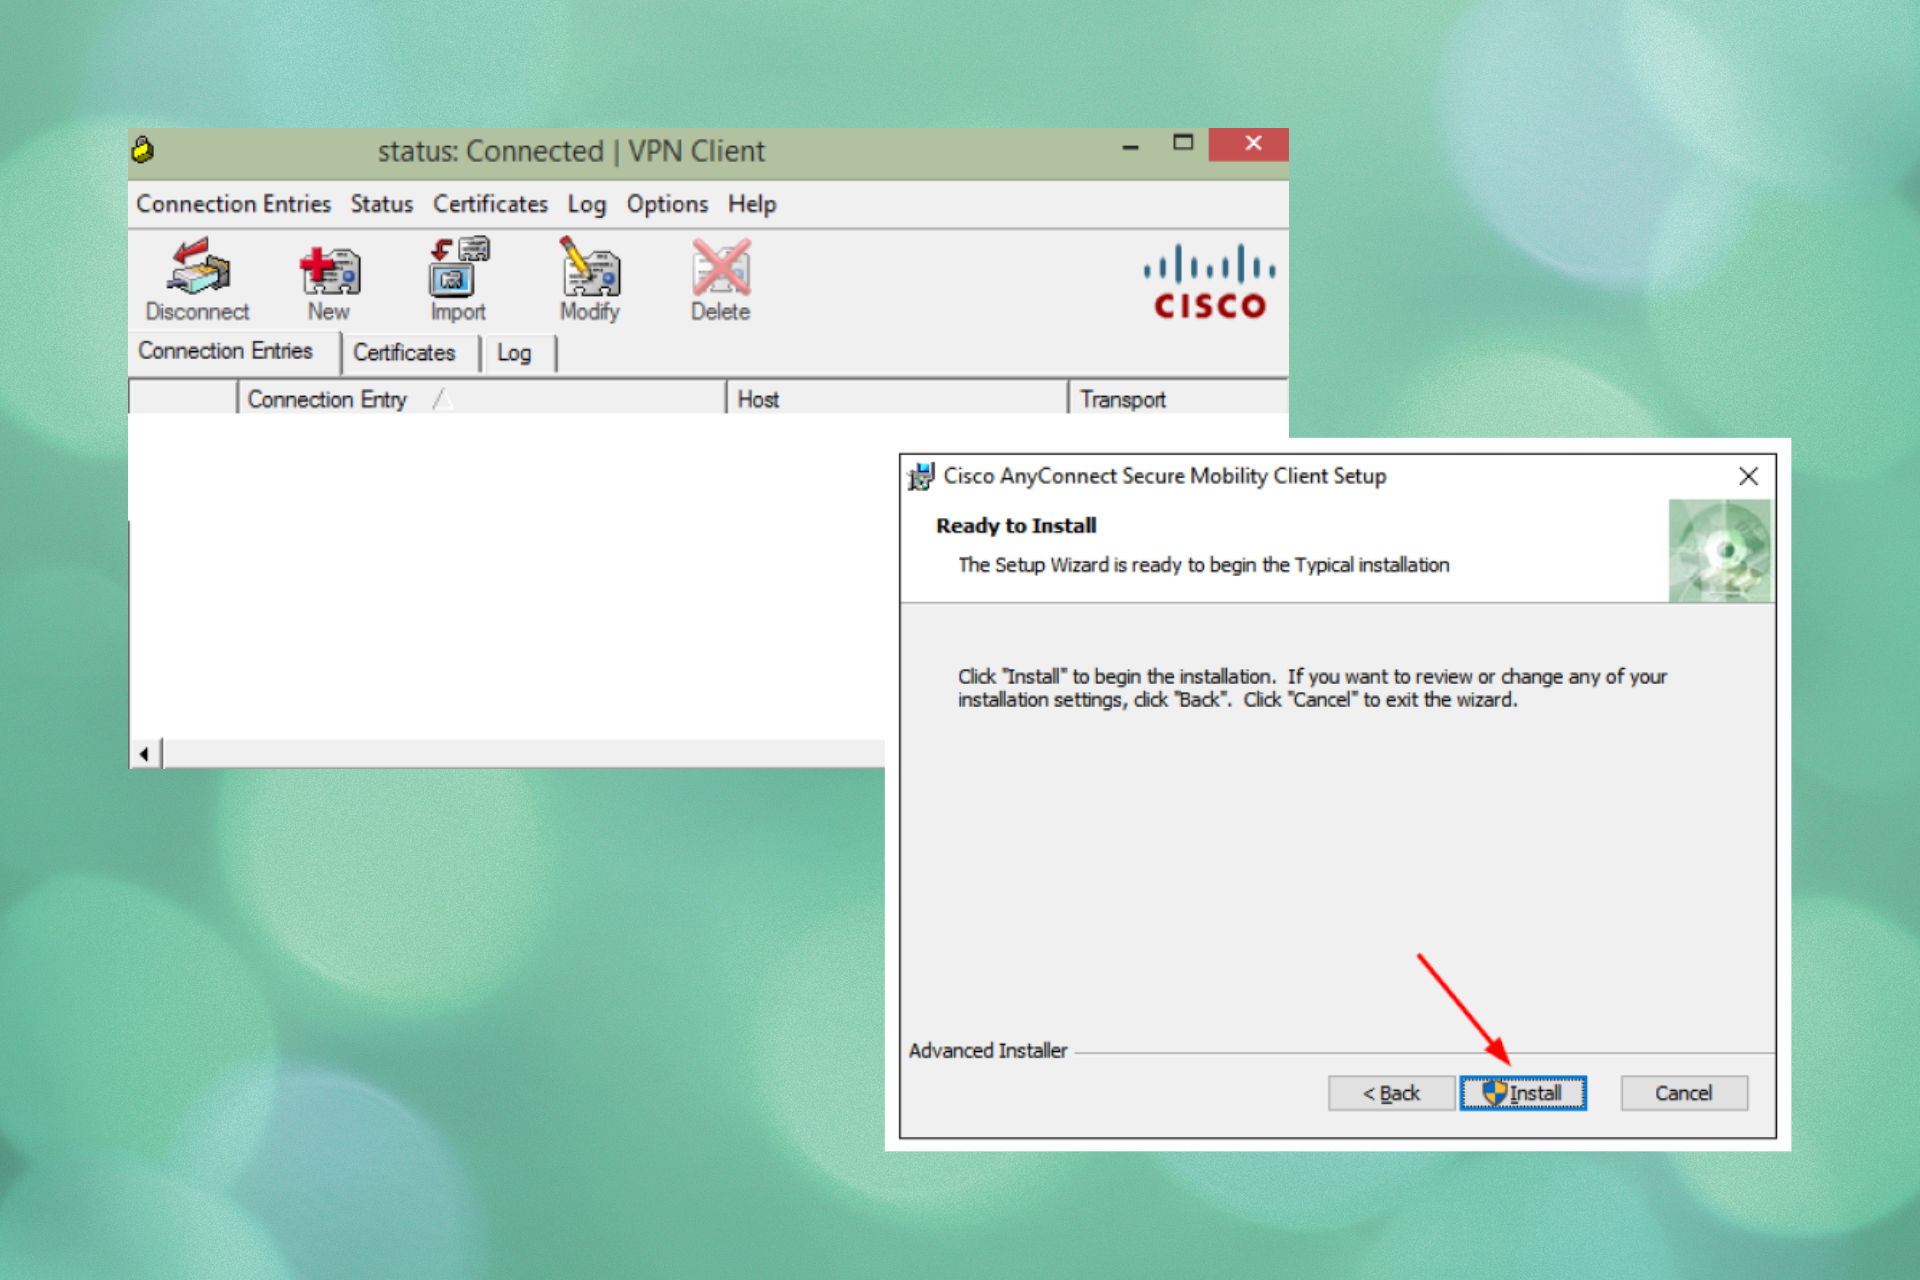 how to install cisco vpn client on windows 10